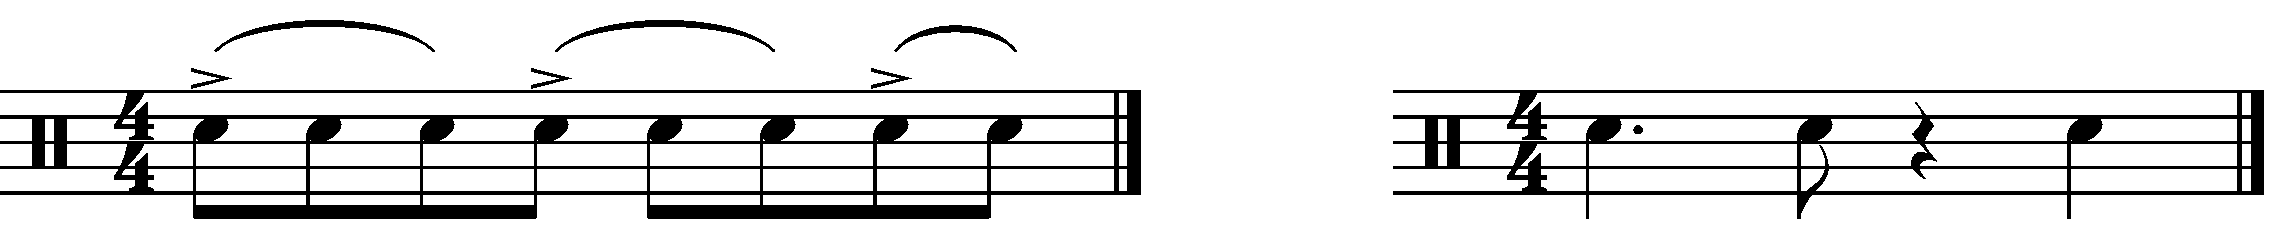 The basic syncopated rhythm for these fills.